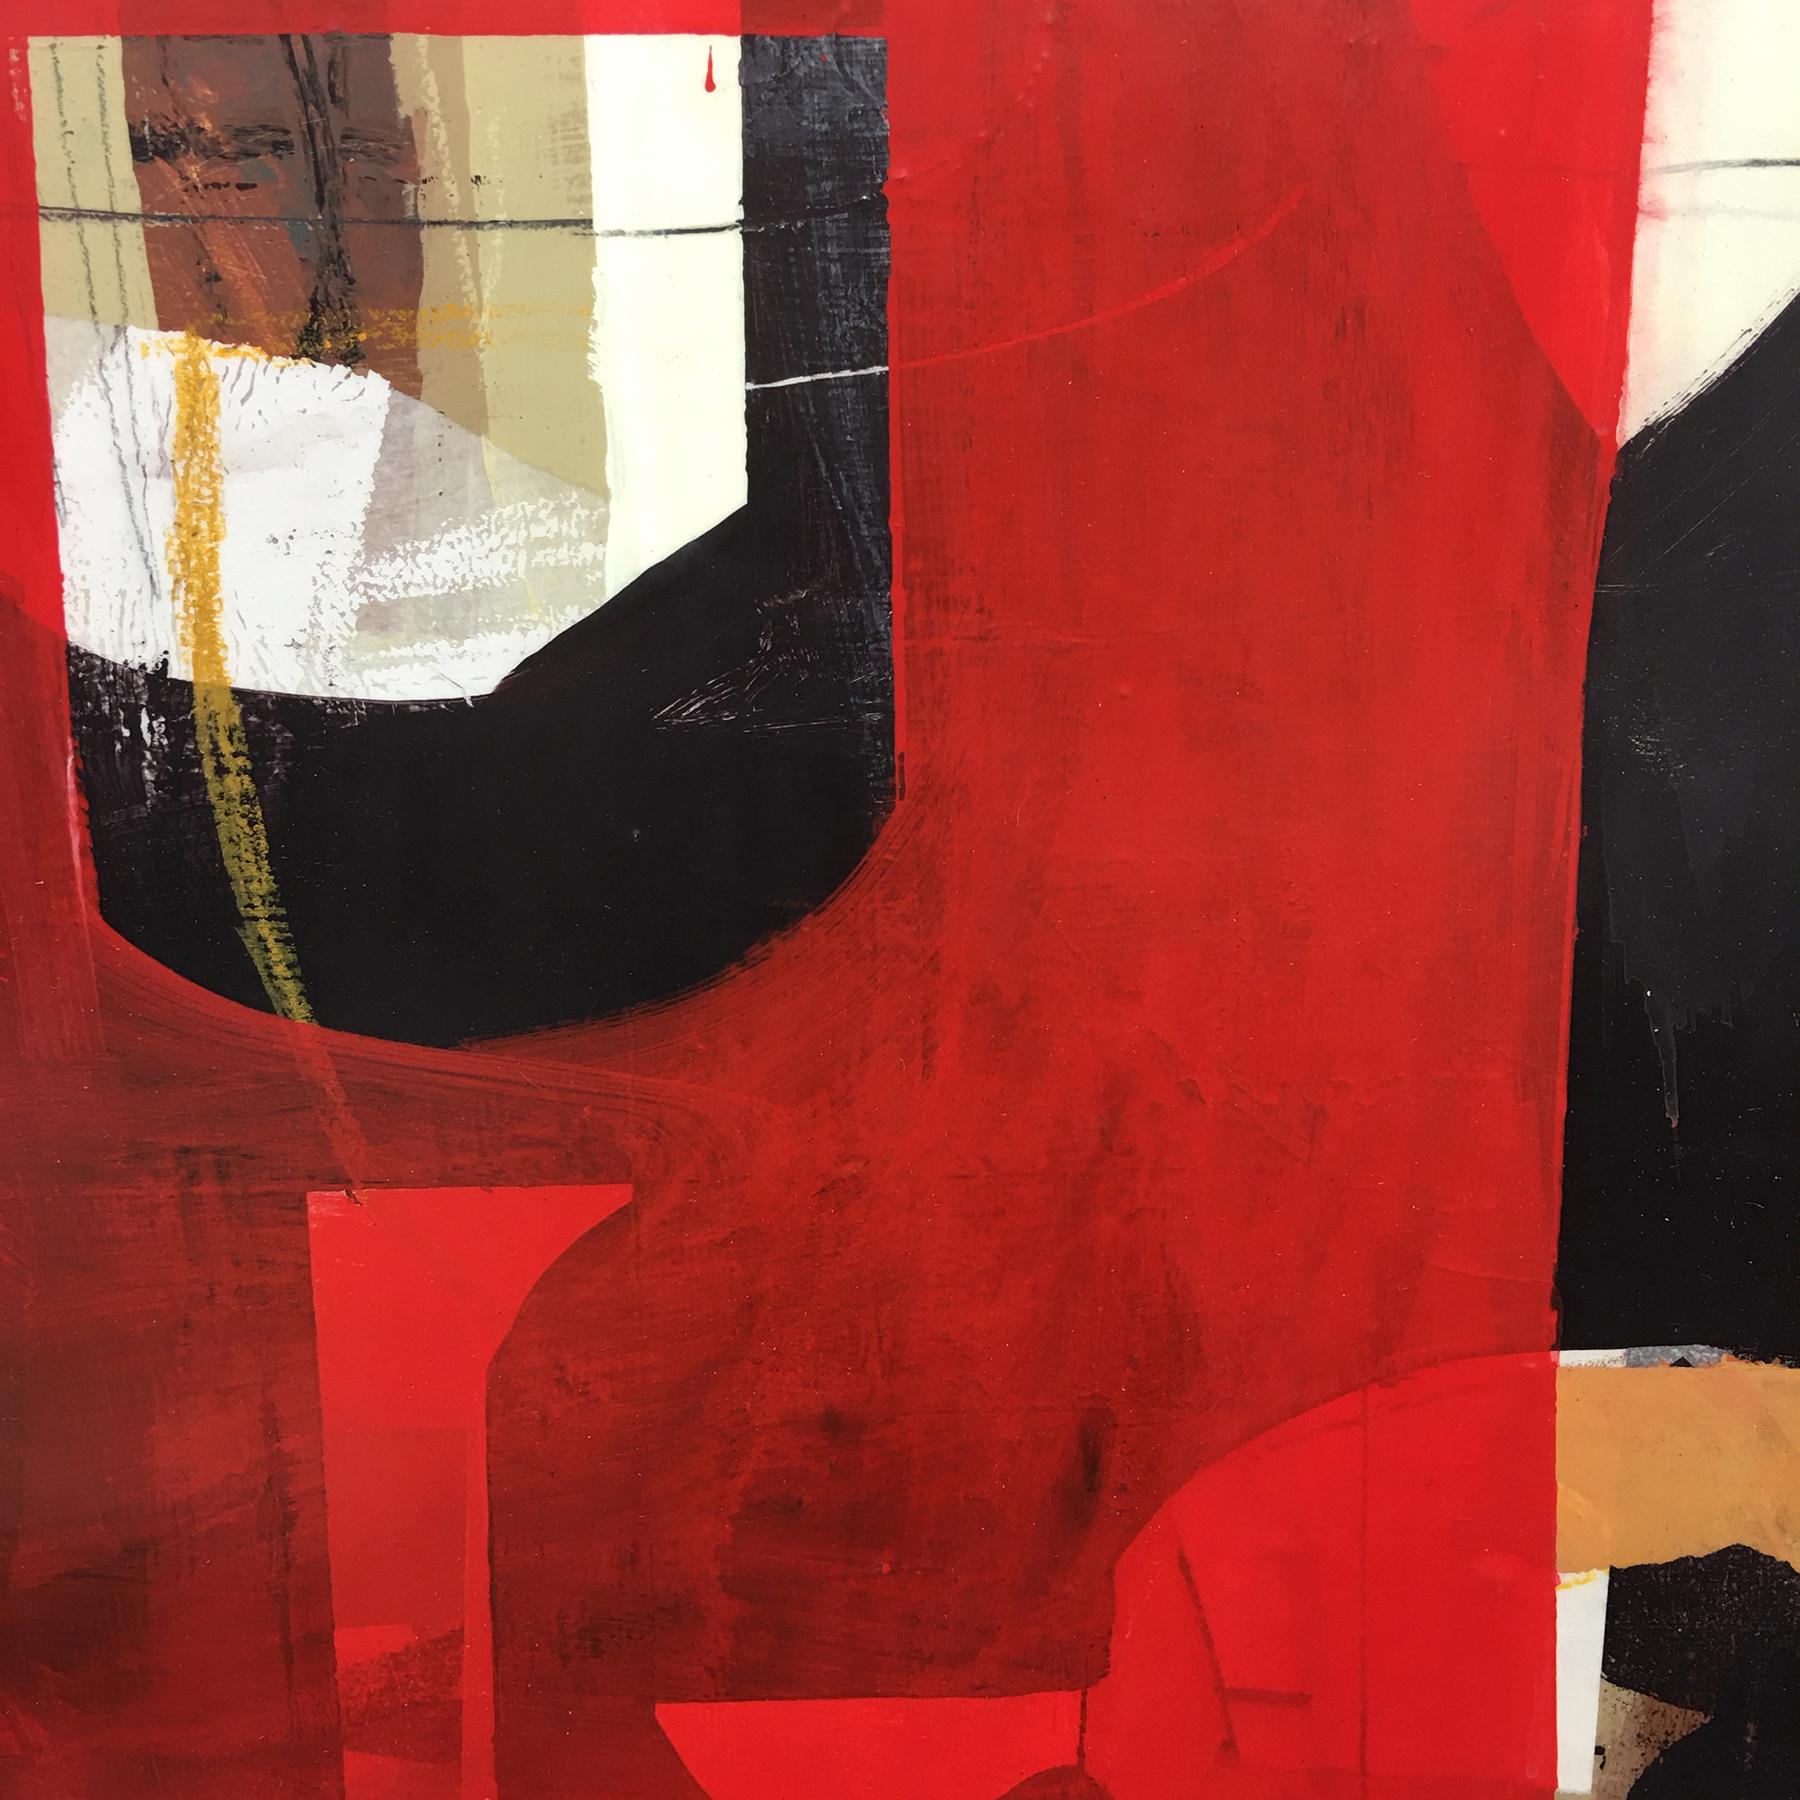 Queen of hearts - abstract red grey brown black painting and collage on panel - Painting by Deborah T. Colter